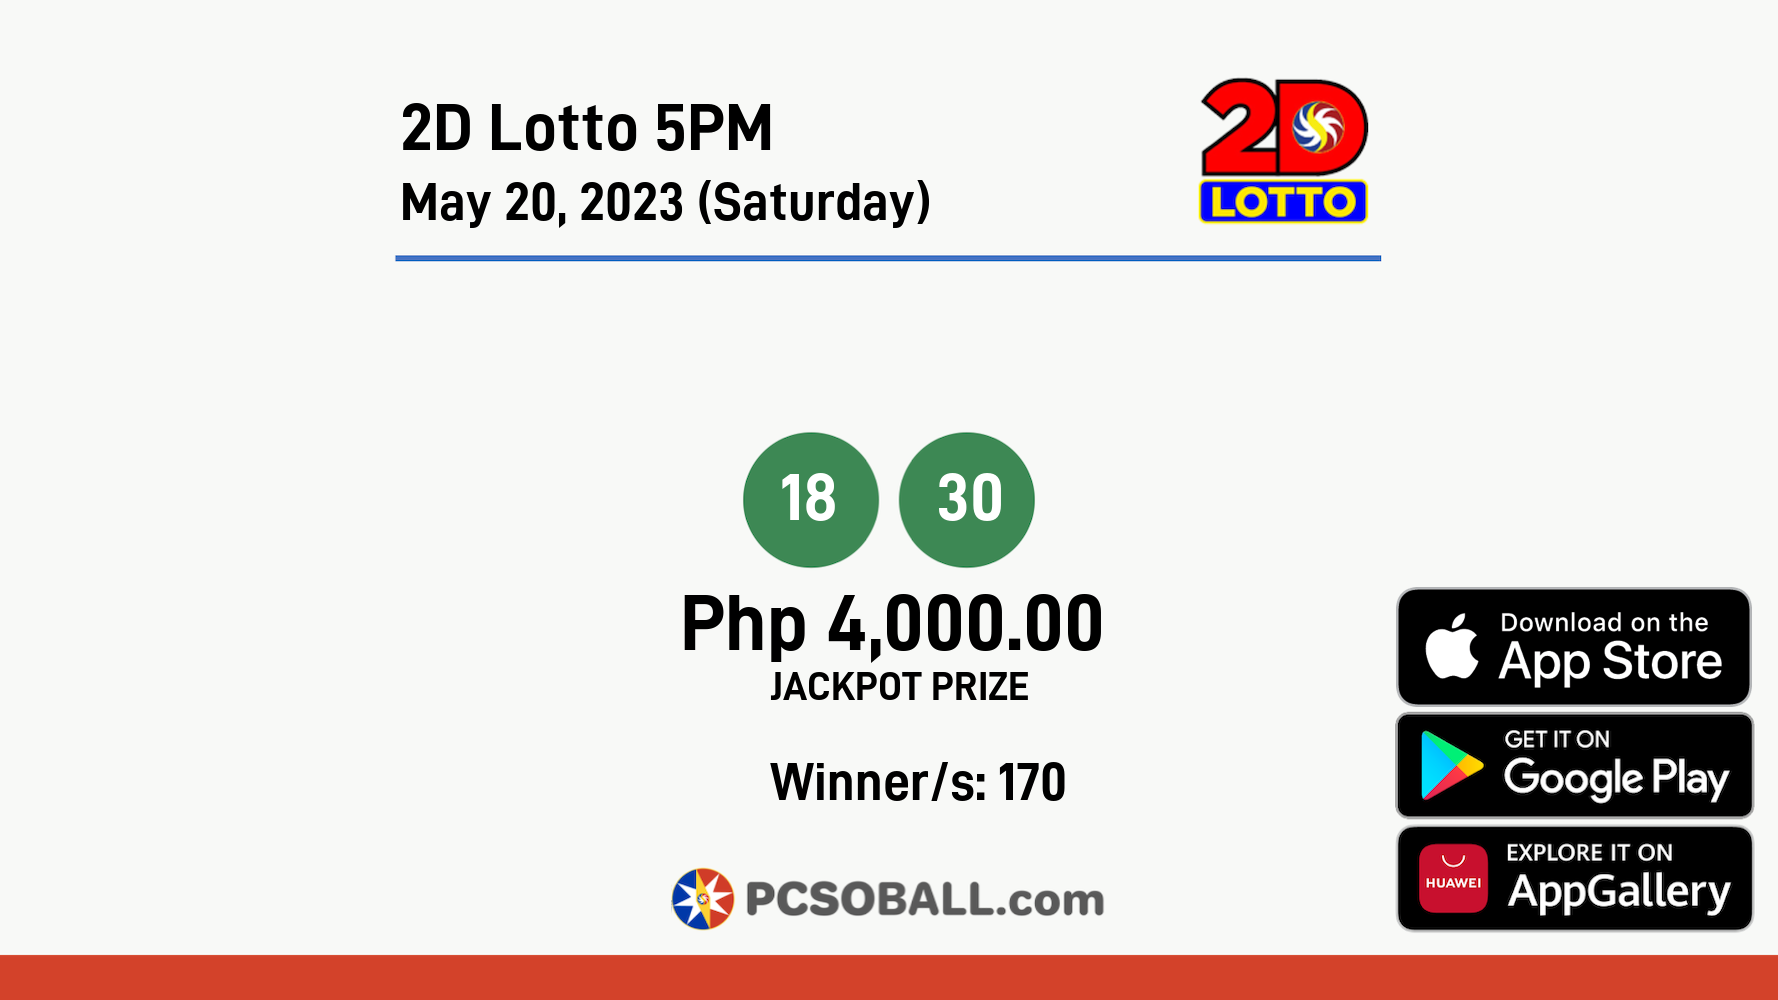 2D Lotto 5PM May 20, 2023 (Saturday) Result